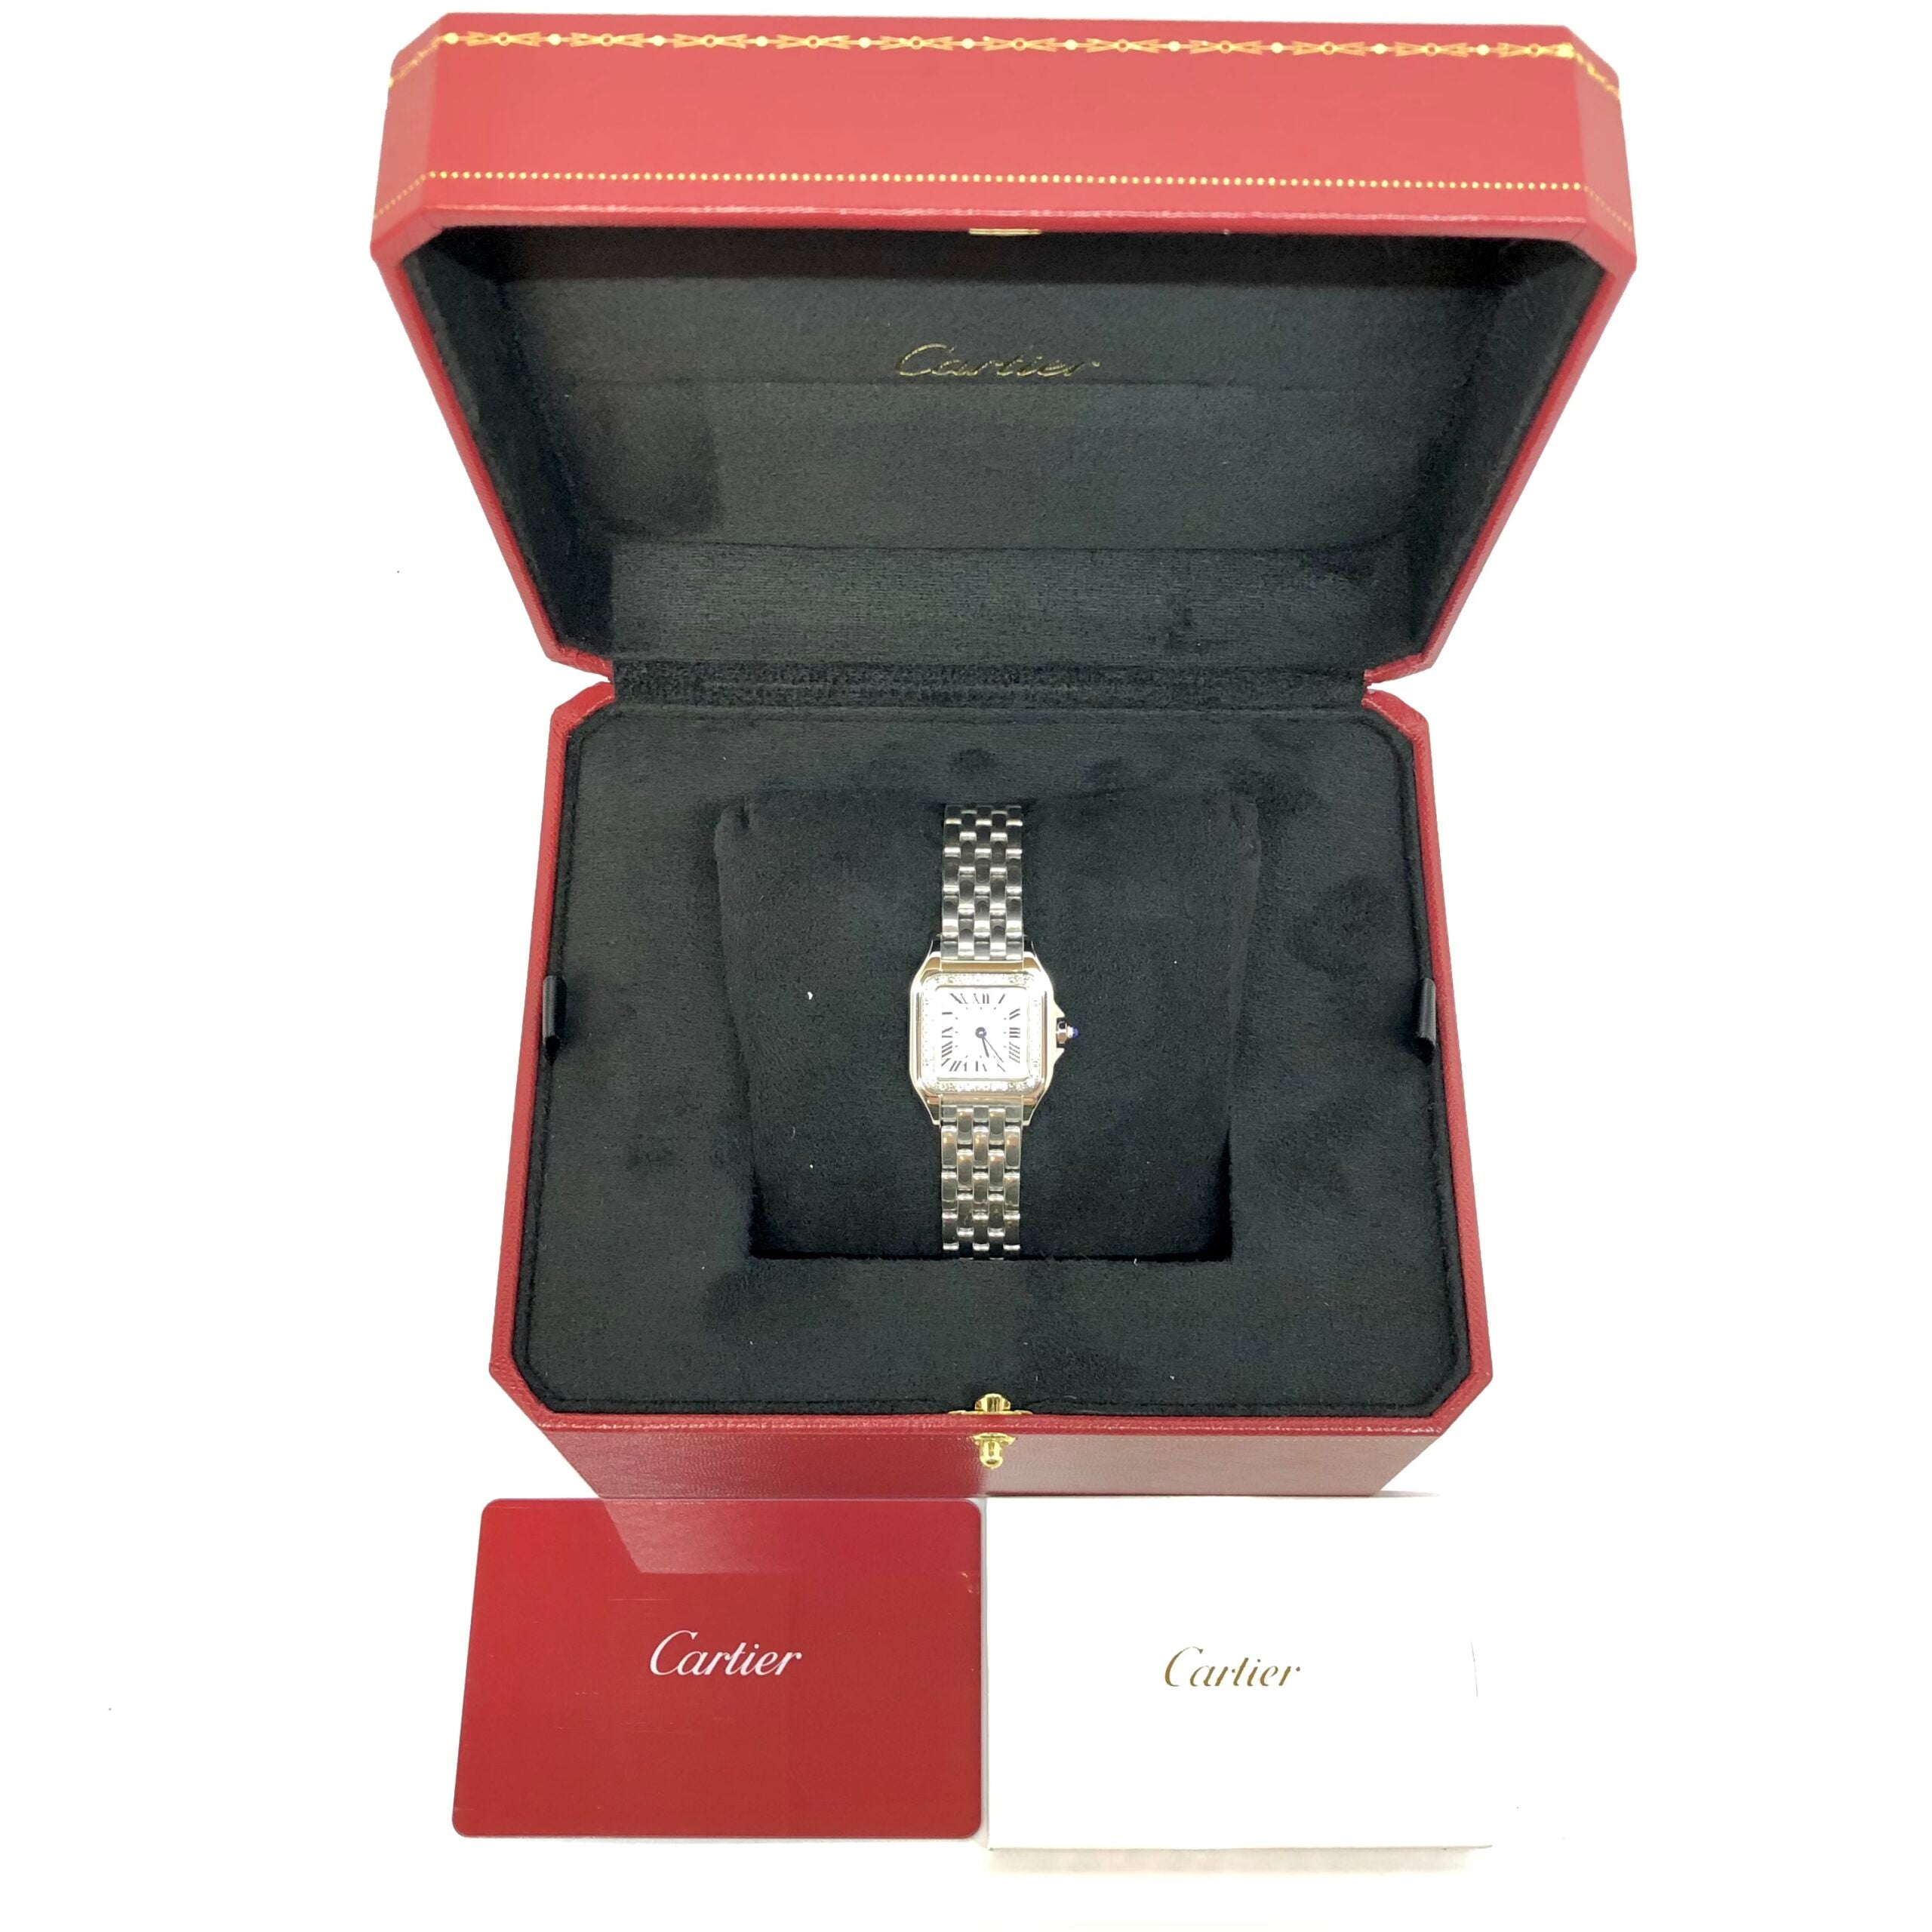 Cartier Panthère Stainless Steel & Diamonds Small Model Ladies Watch